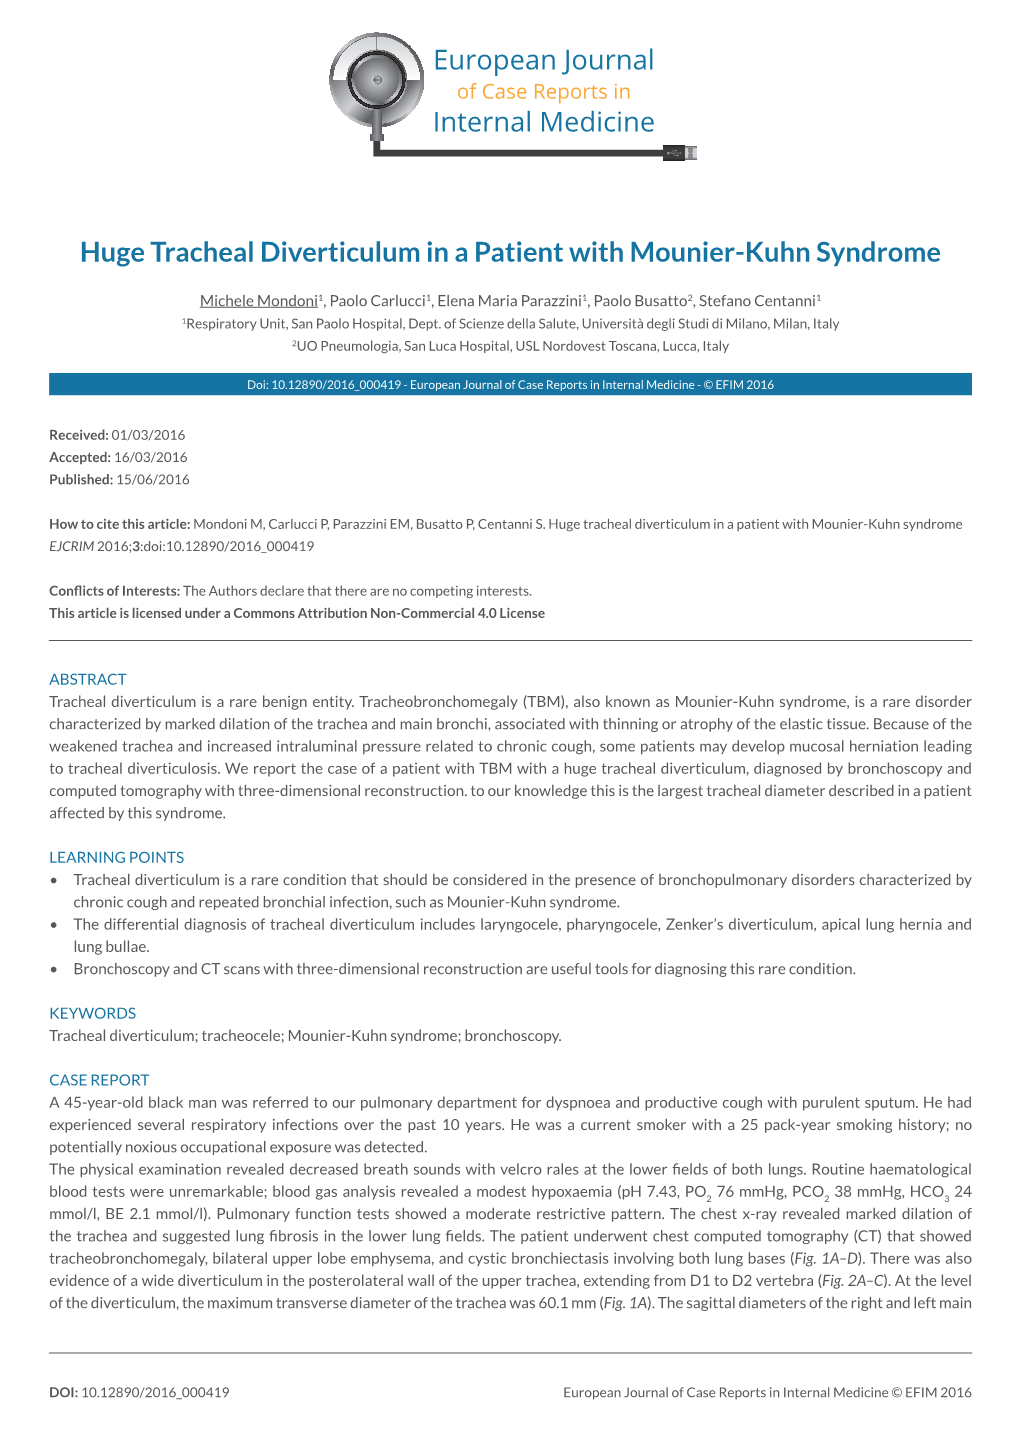 Huge Tracheal Diverticulum in a Patient with Mounier-Kuhn Syndrome